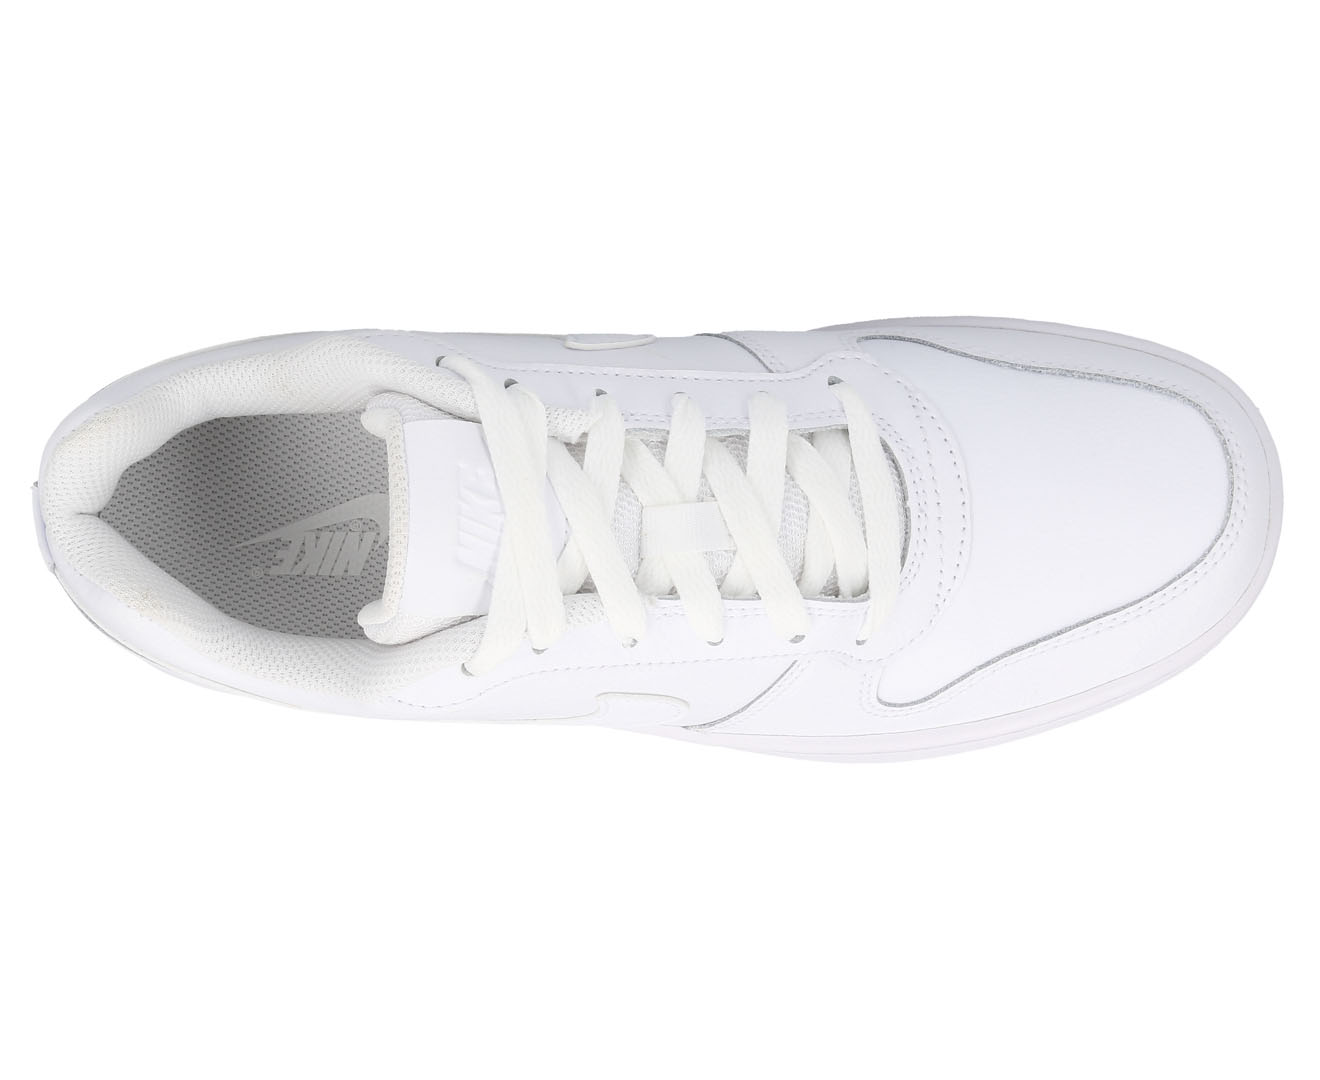 women's ebernon low casual sneakers from finish line